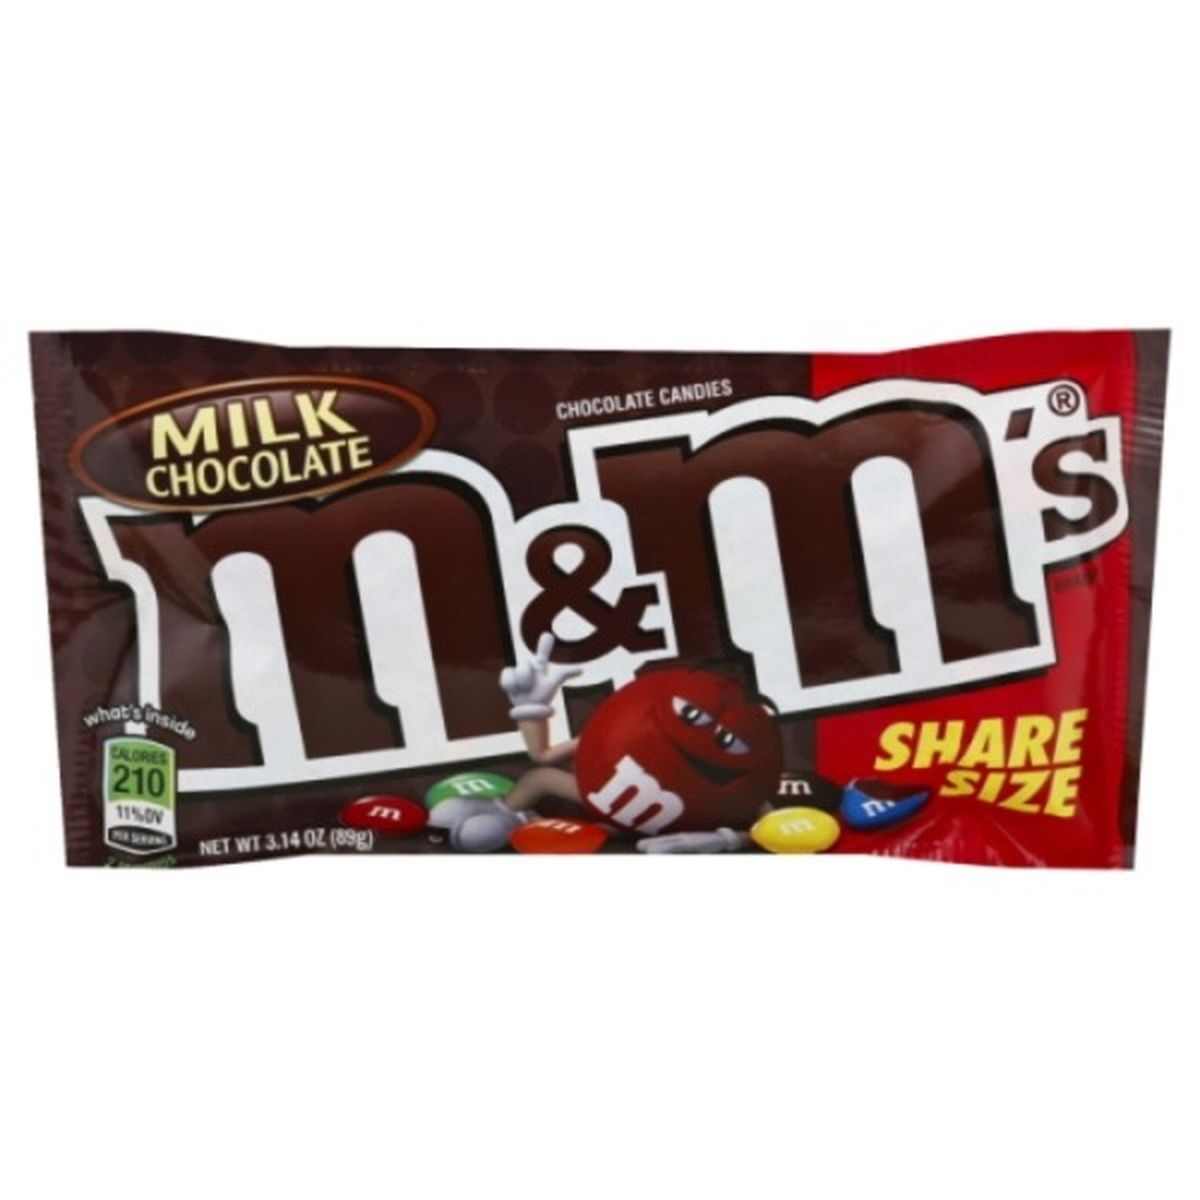 Calories in M&M's Chocolate Candies, Milk Chocolate, Share Size